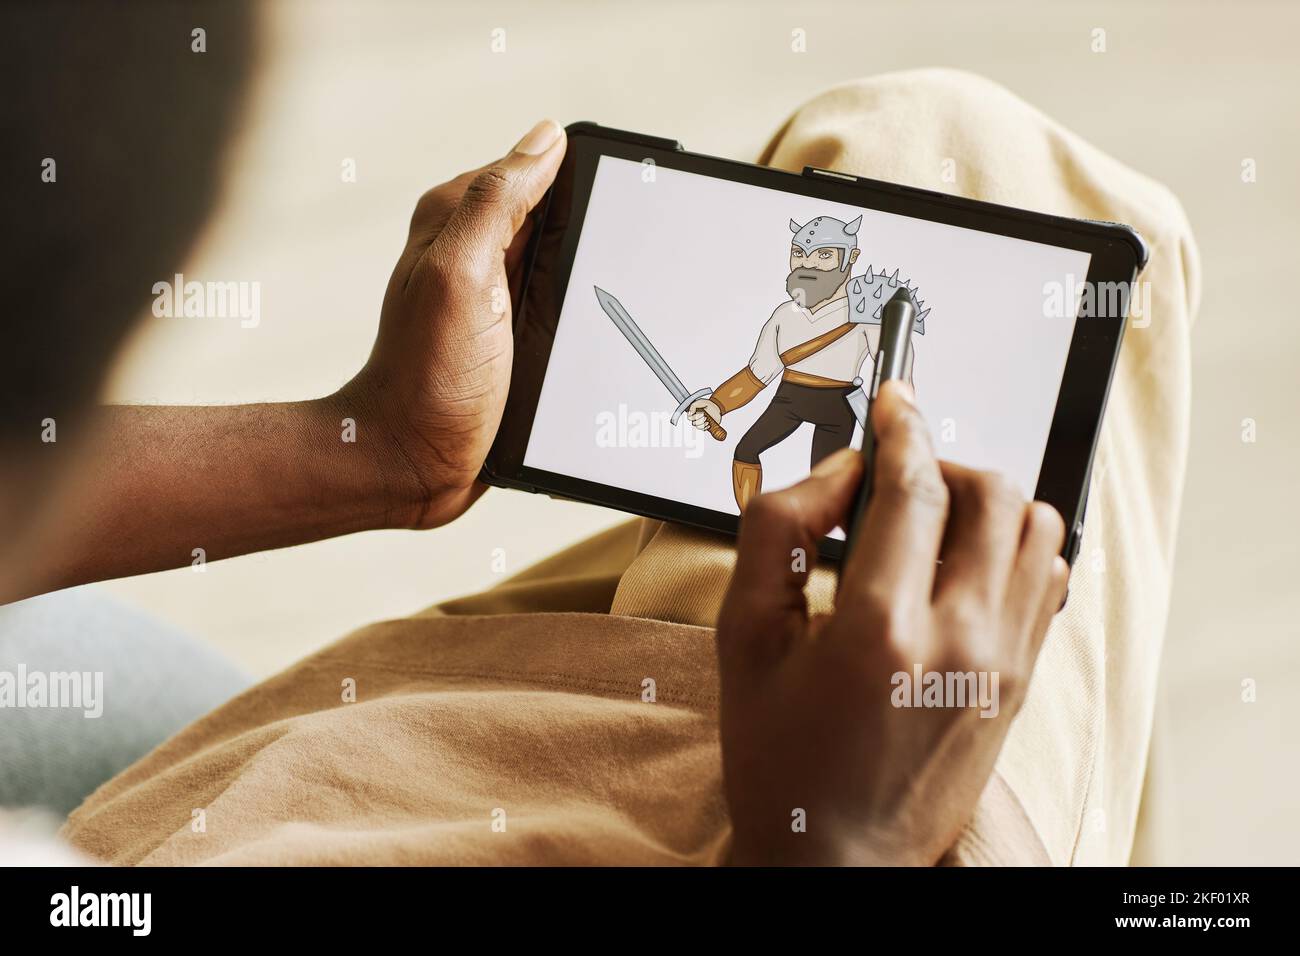 Hands of young black man with stylus drawing graphic picture of warrior on tablet screen while creating new collection of digital artworks Stock Photo